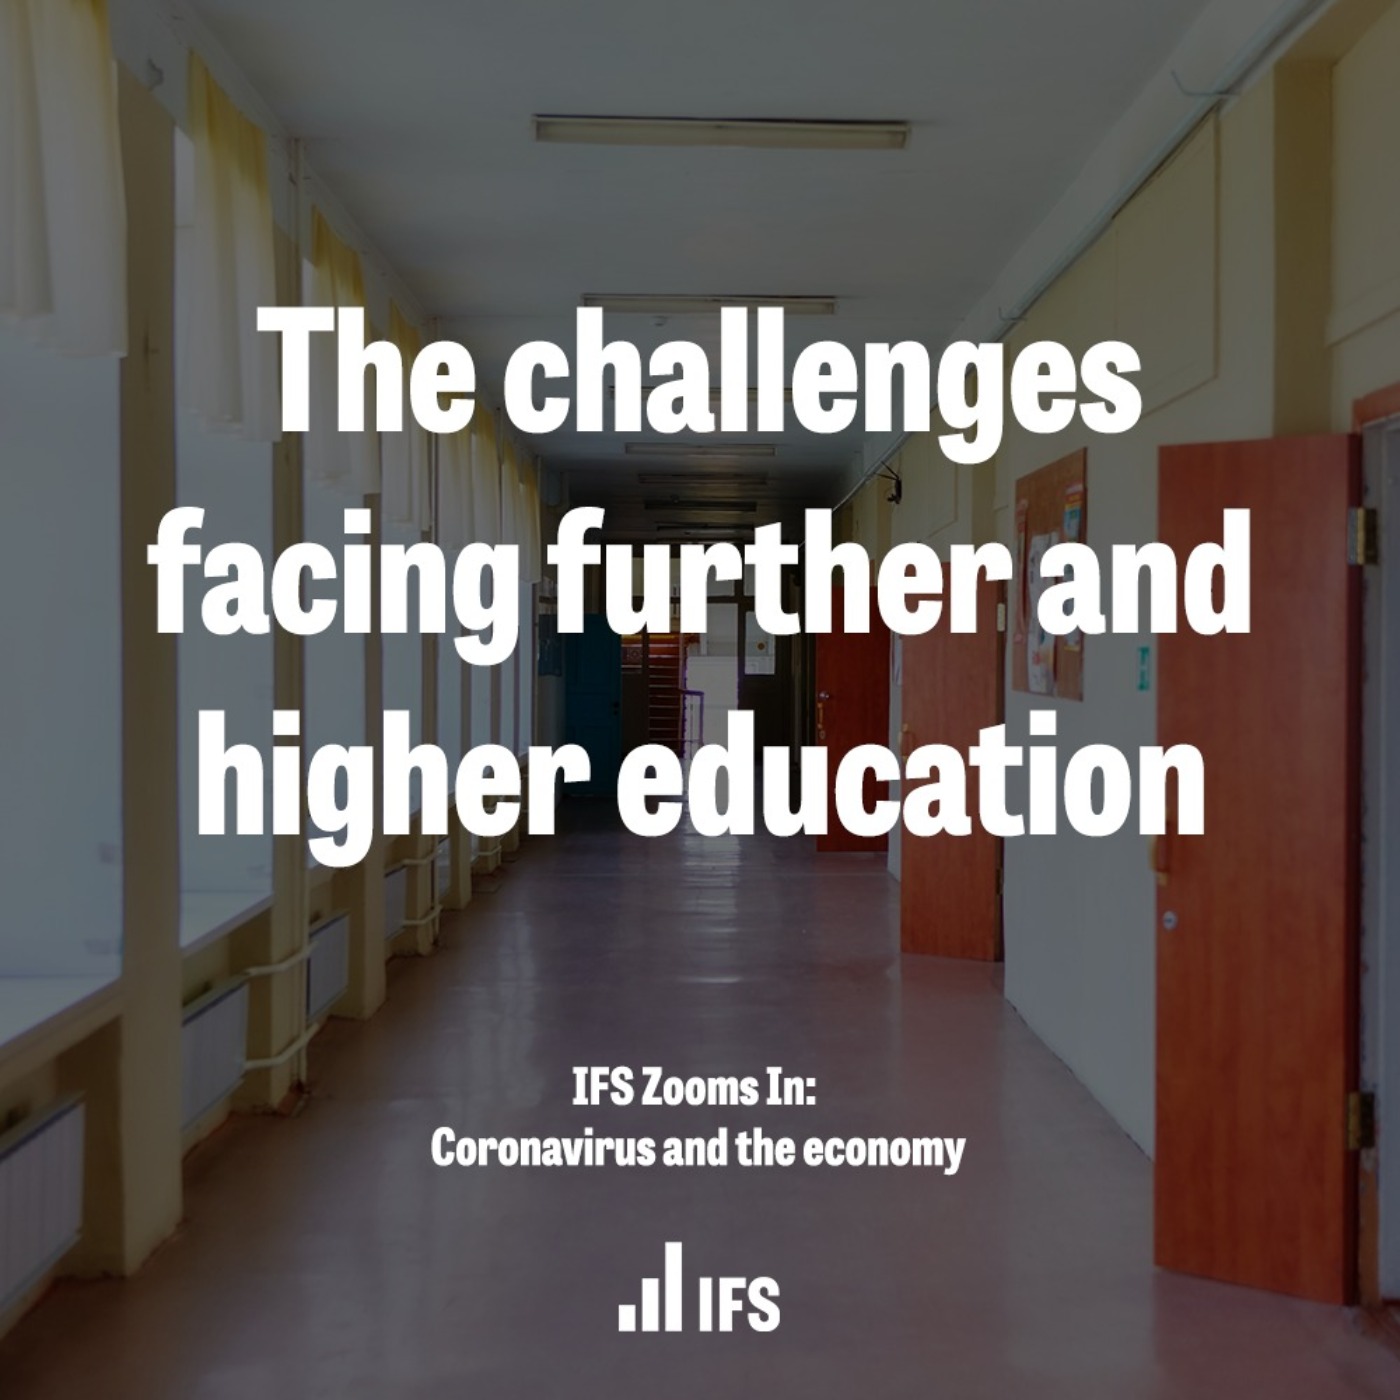 The challenges facing further and higher education